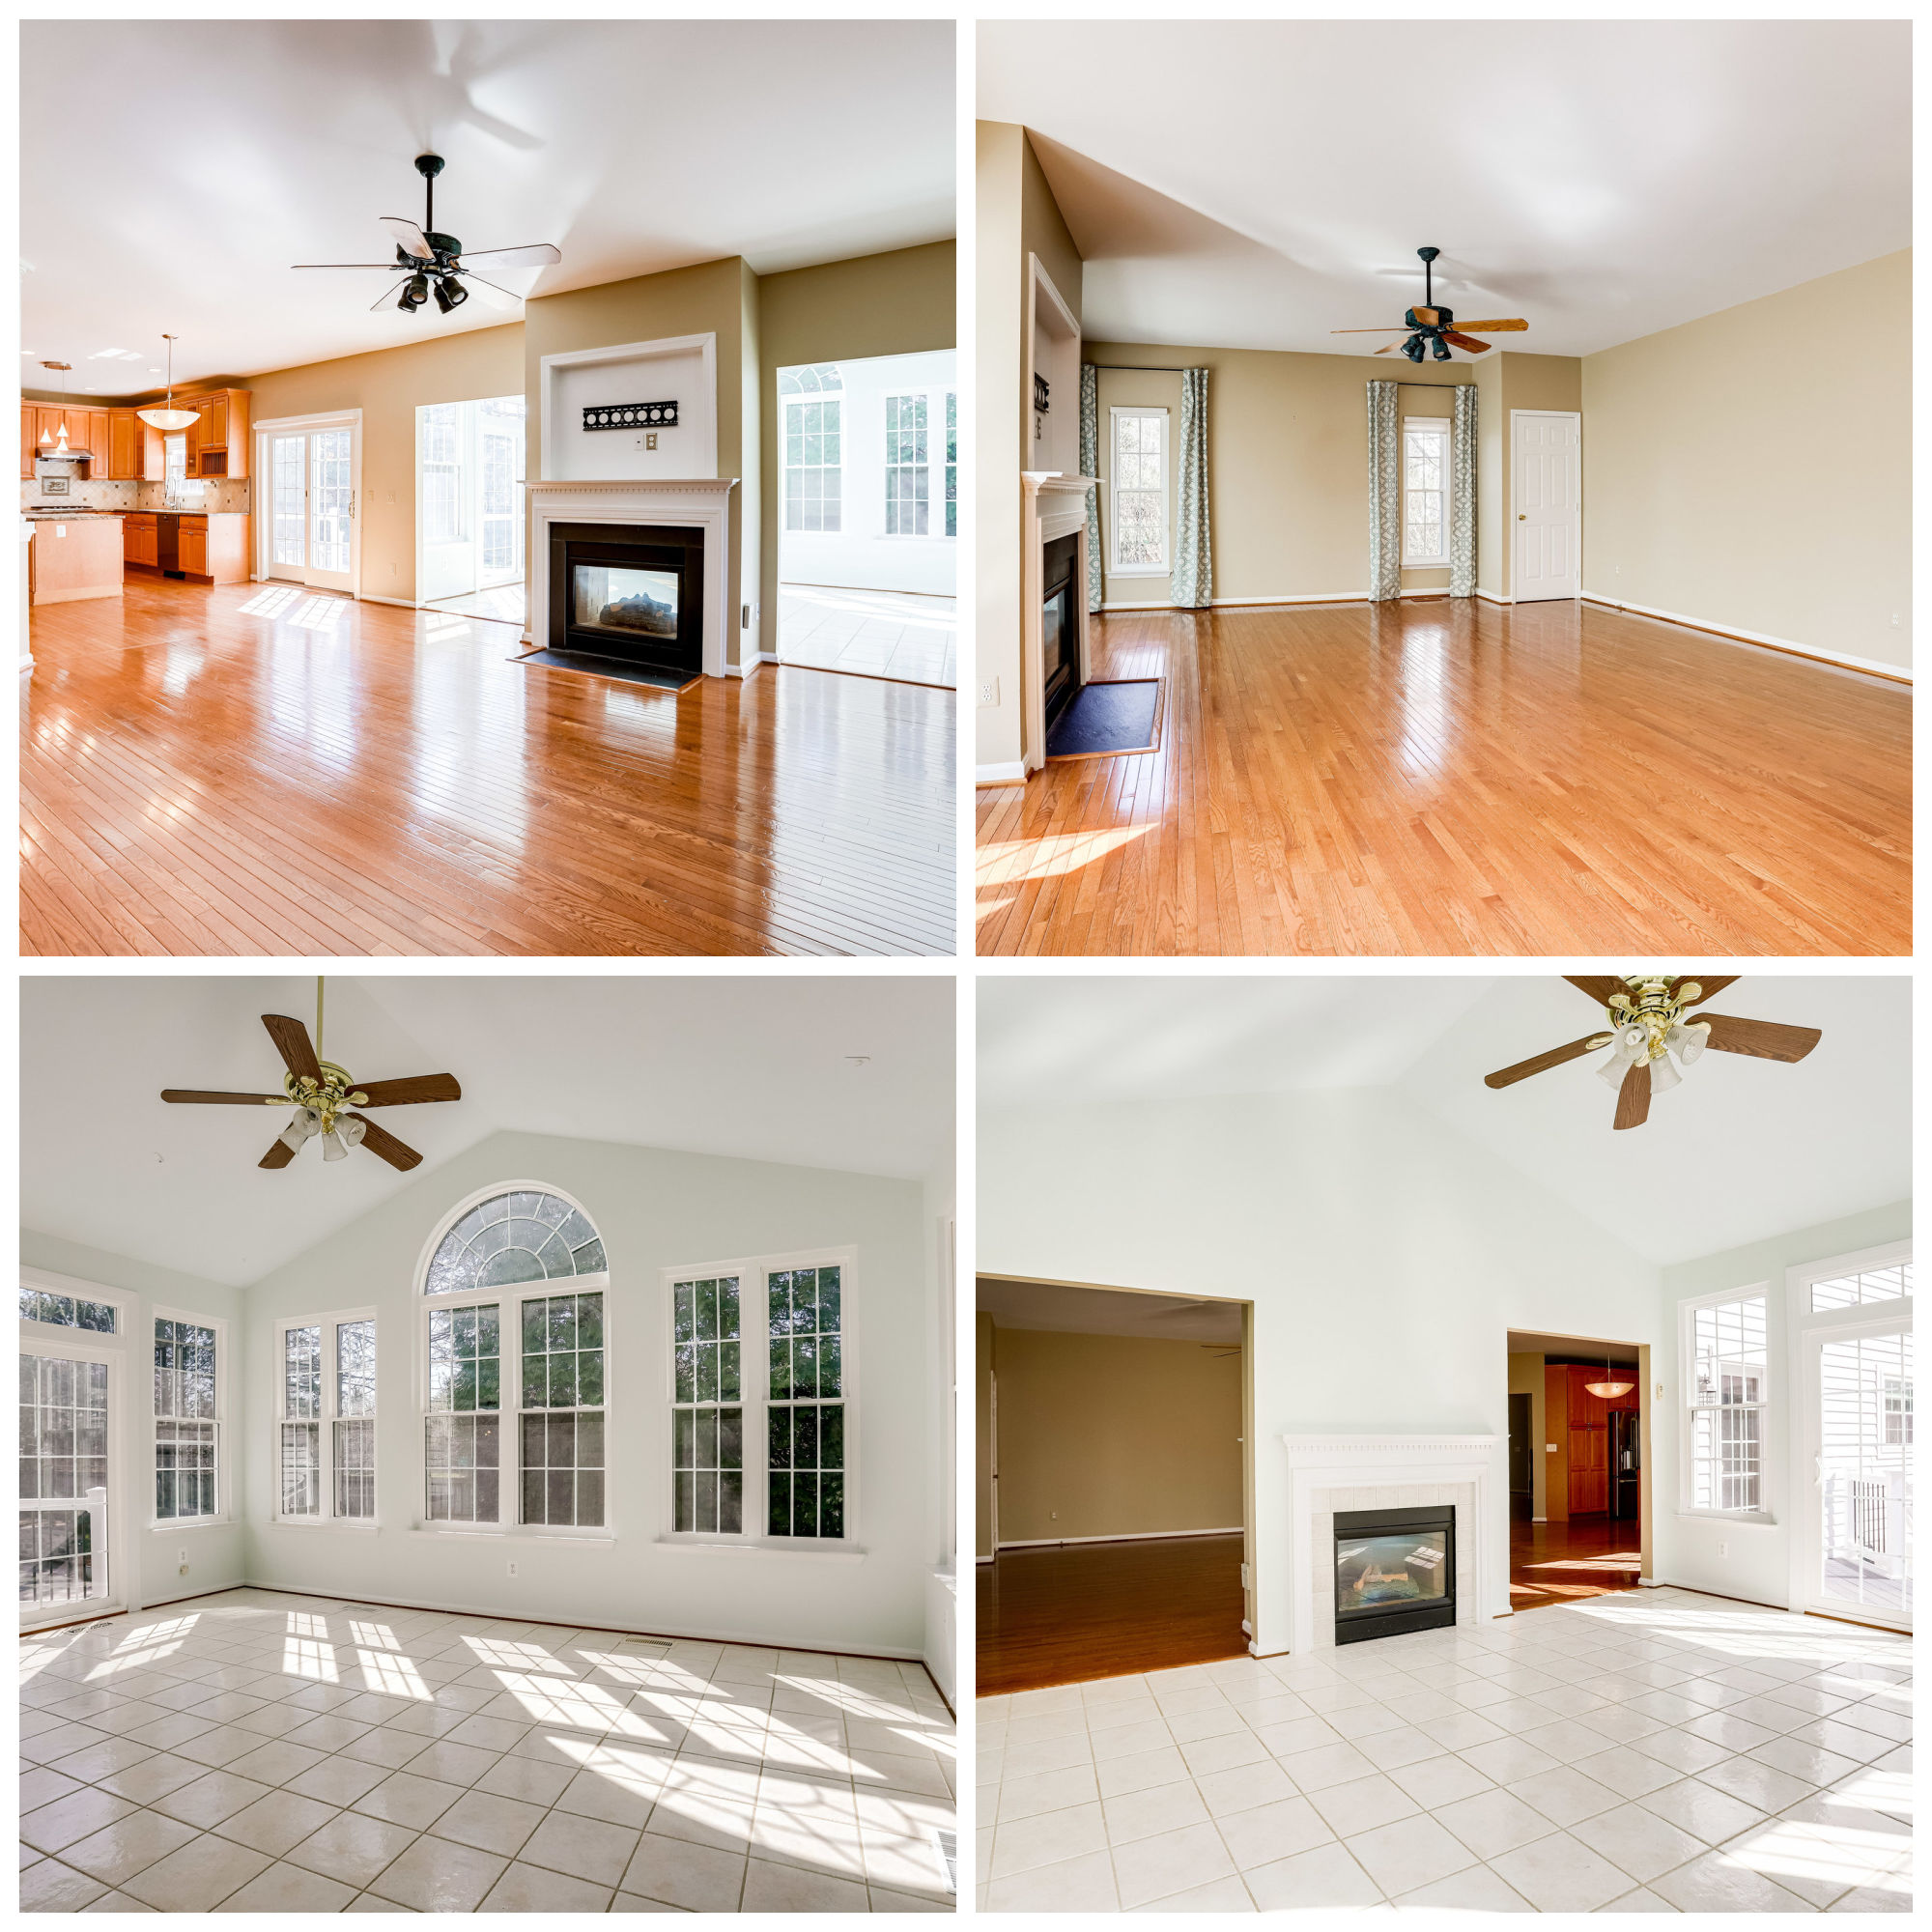 43123 Arundell Ct, Broadlands- Family Room and Sun Room